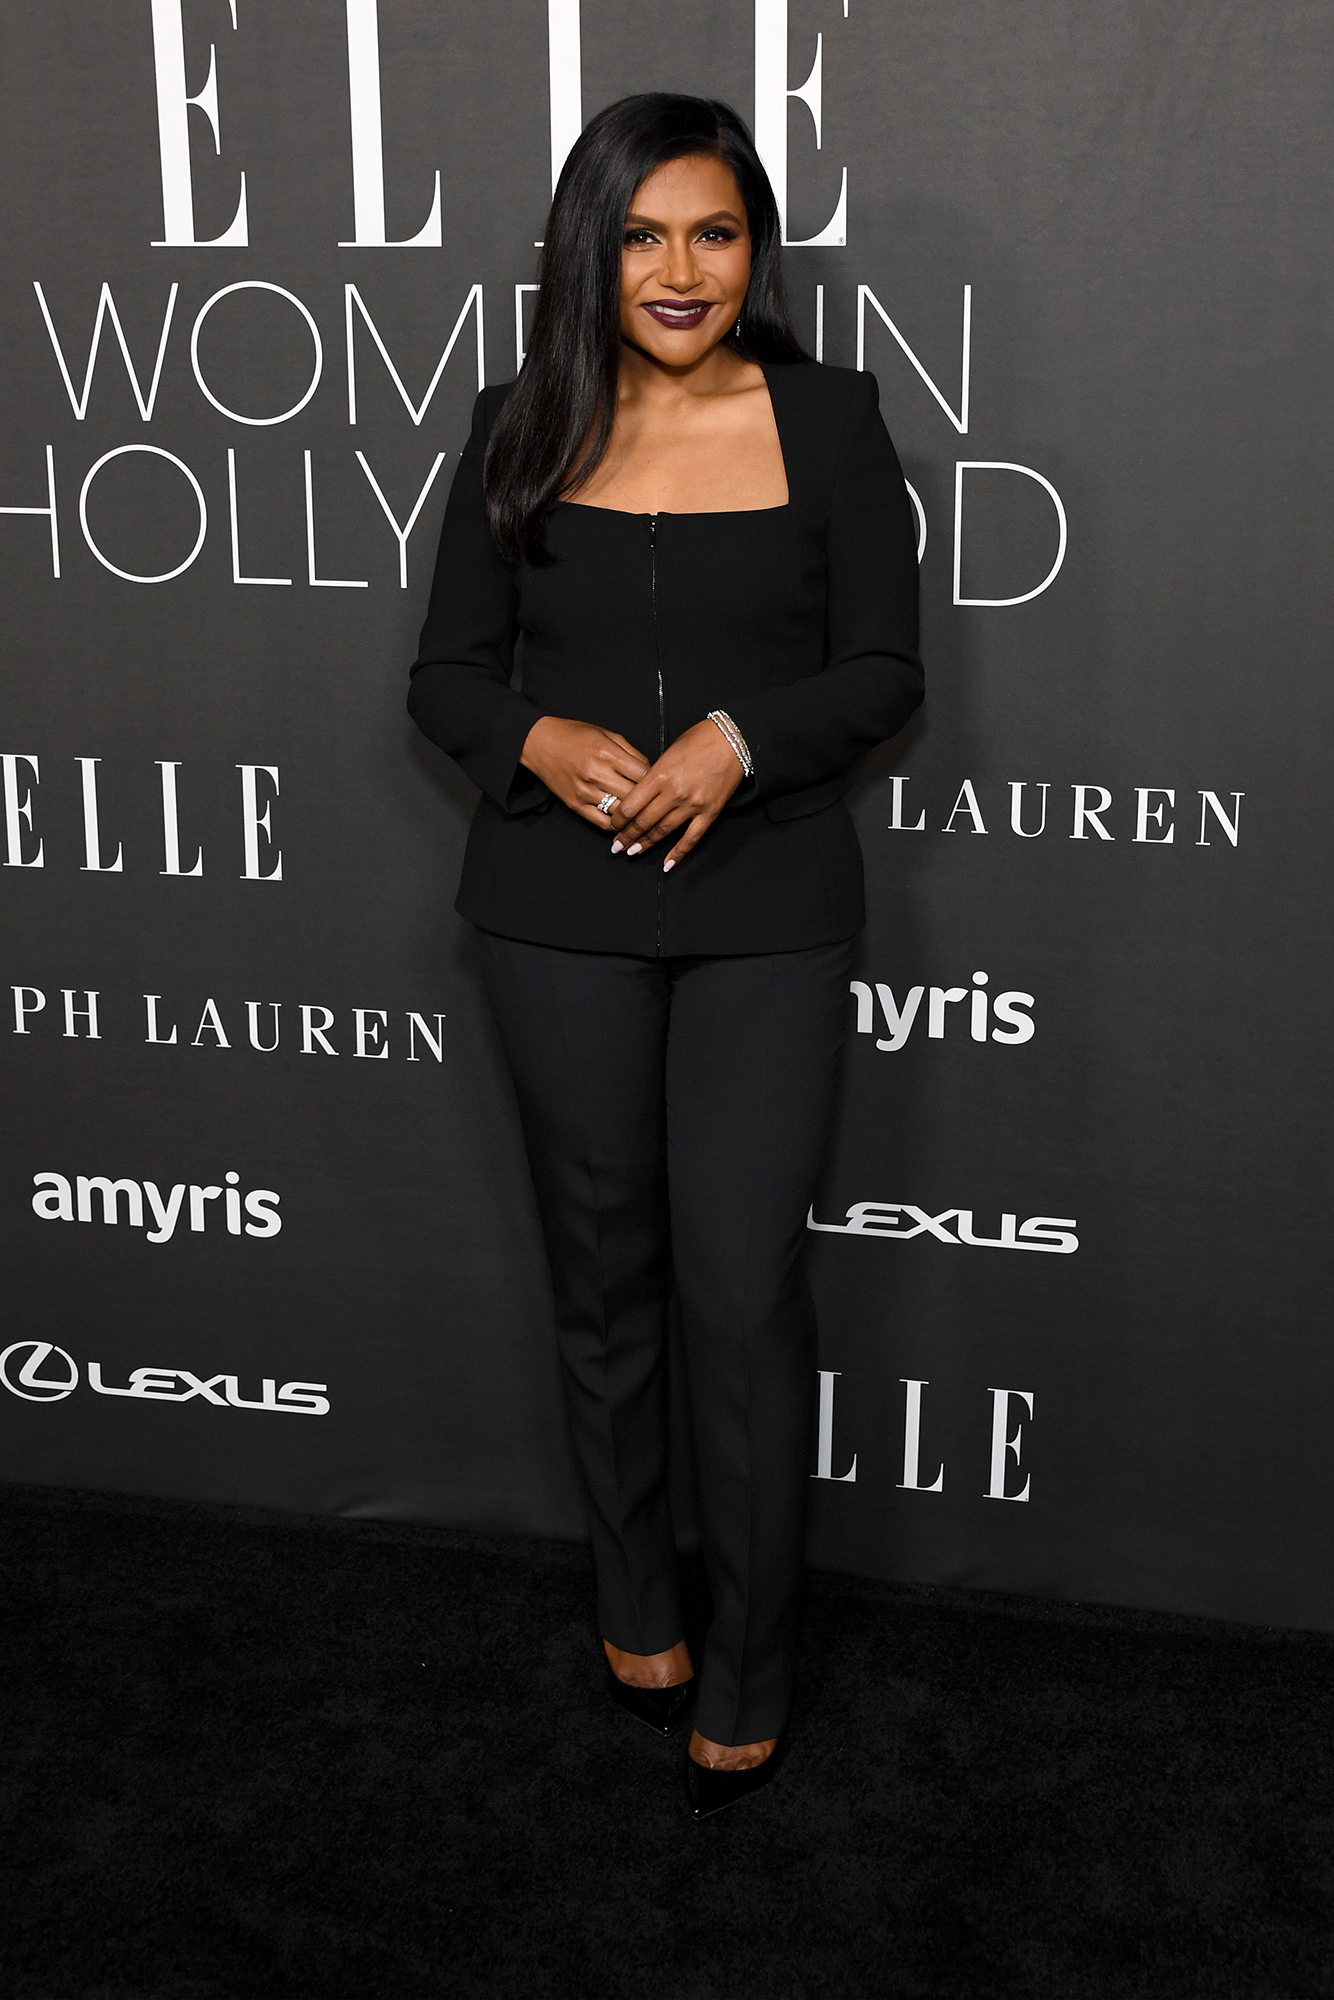 Mindy Kaling wears Ralph Lauren Collection at the Elle Women in Hollywood 2022 celebration.